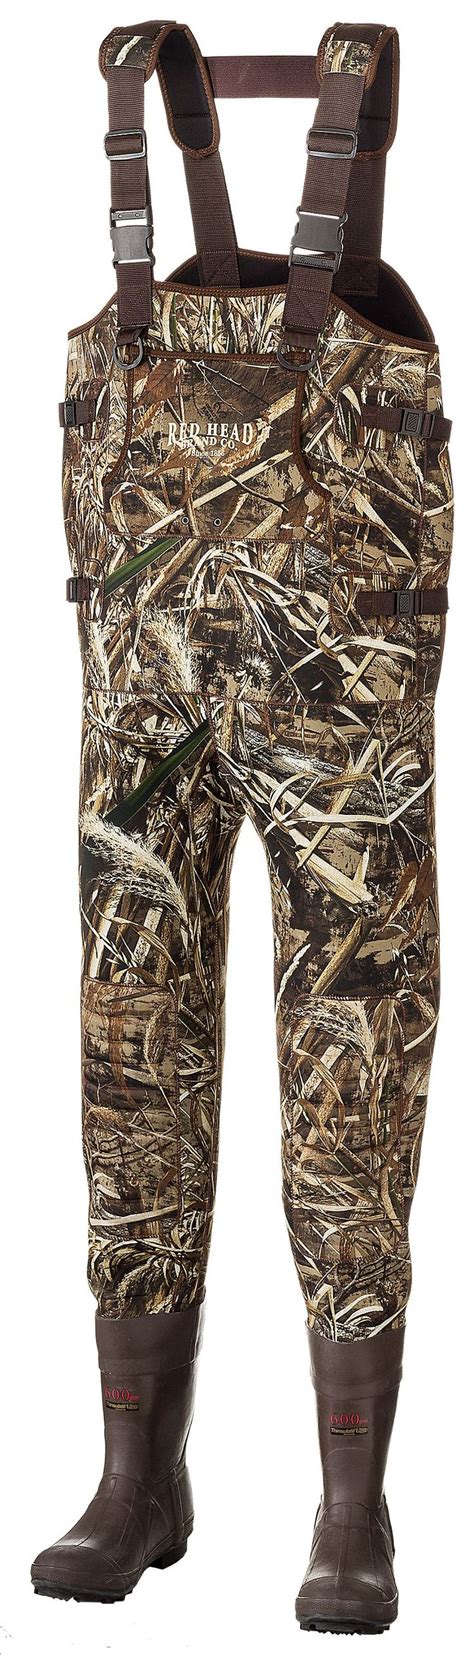 Red head waders. MEN'S CLOTHING & FOOTWEAR REDHEAD HUNT Redhead Ranch BASE LAYERS SHOP ALL RedHead was built to help pioneers cross a vast, lonely land to expand American ideals and build a new life. Today, RedHead makes apparel for men who see a little bit of themselves in those pioneers. 